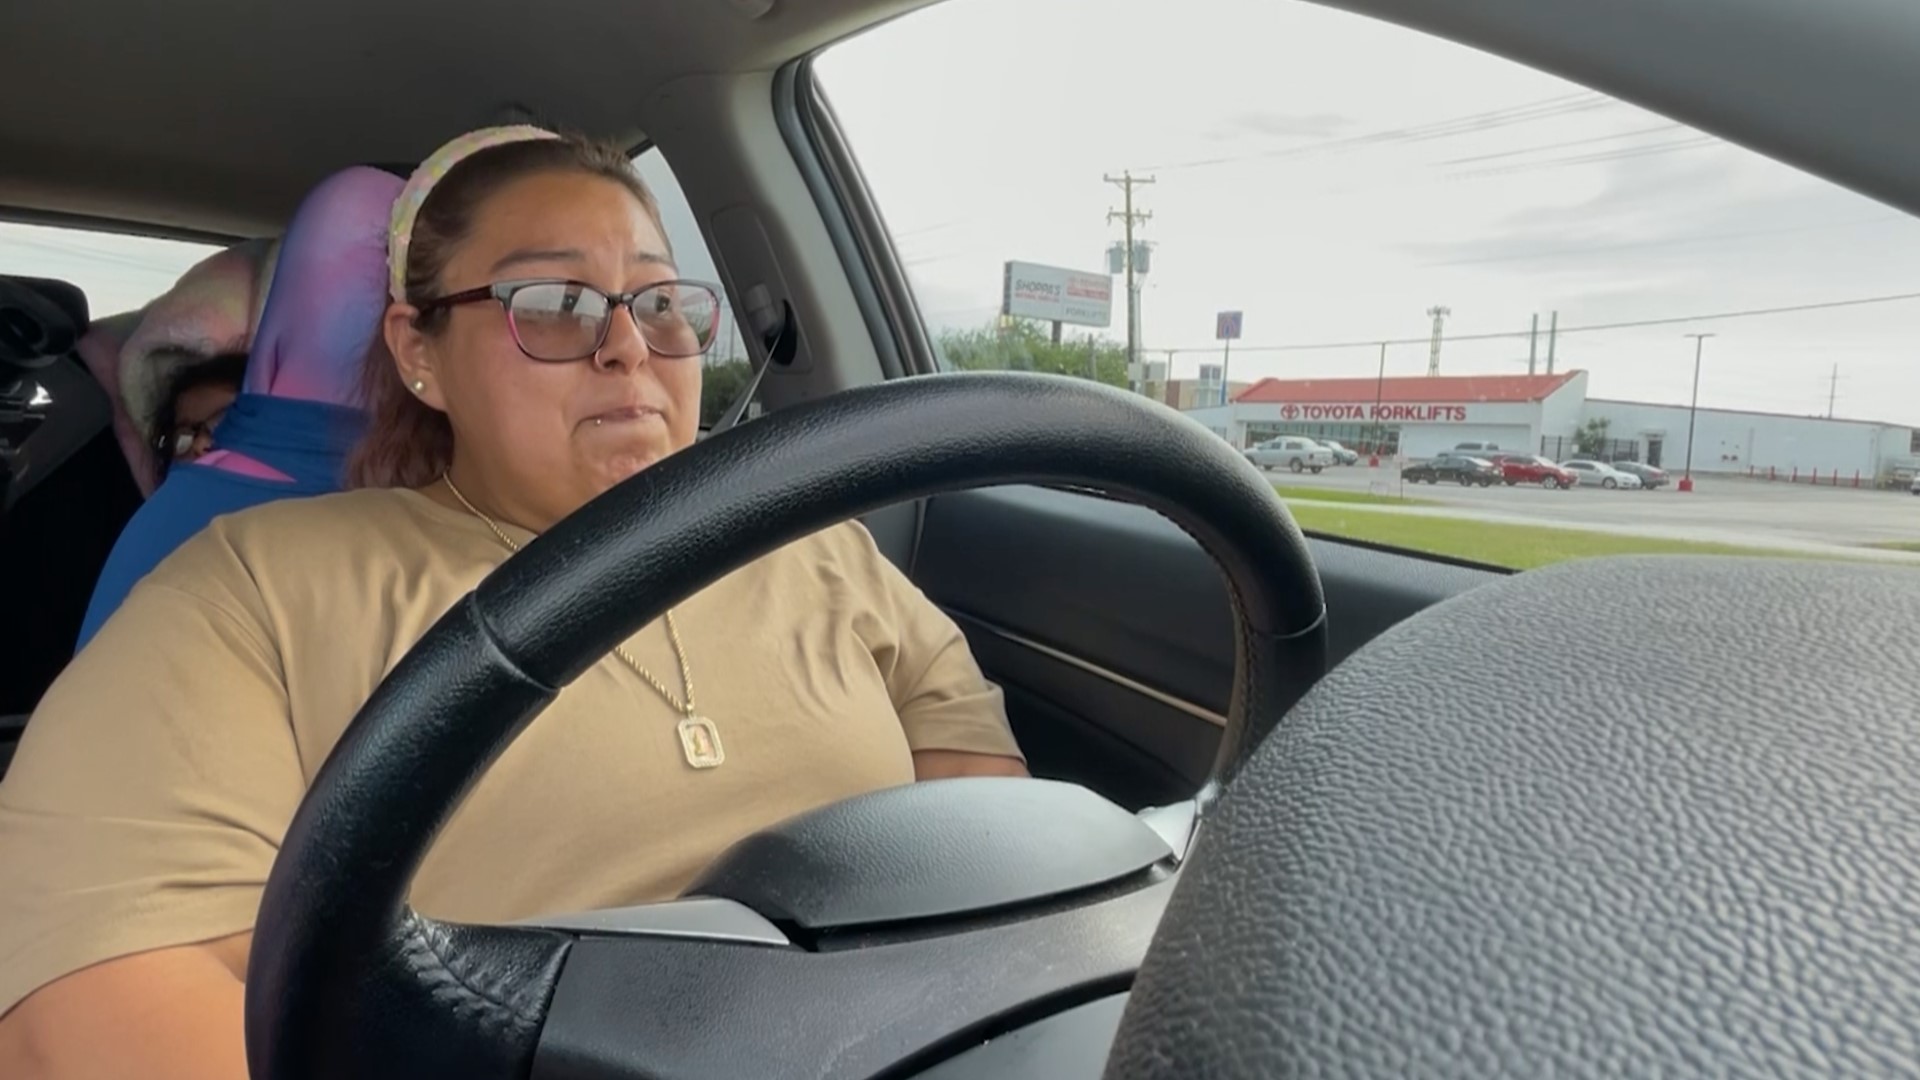 It was the start of an arduous mission she has repeated day after a day for more than a month: driving to several stores in search of daughter’s formula.